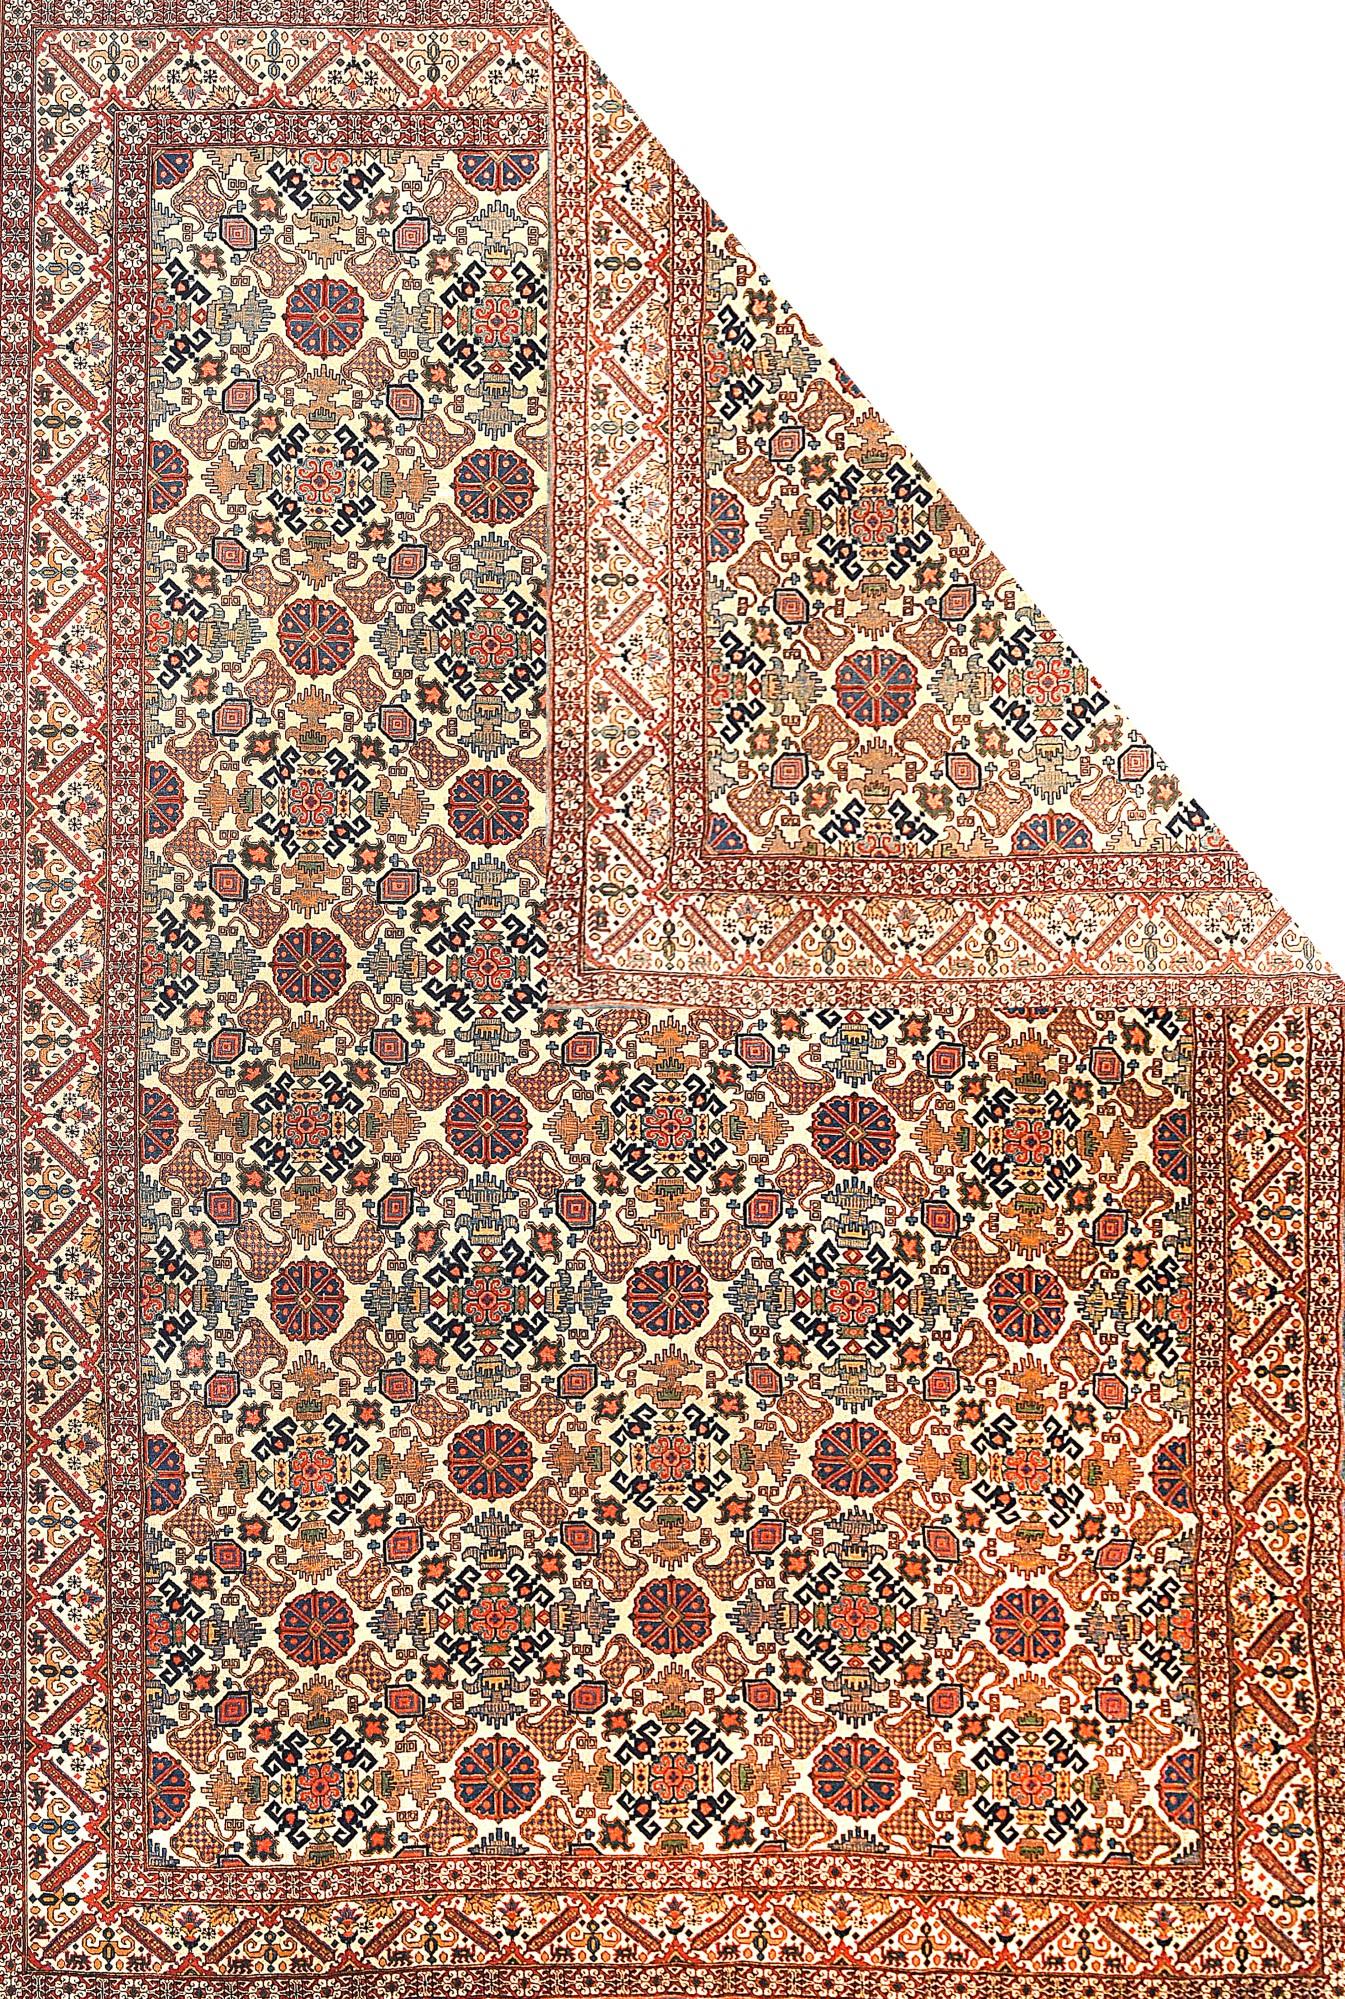 Tehran carpets were woven primarily for the nouveau riches in the Interwar period, as is indicated by the Persian proportions of this finely woven example with an unusual pattern of a broken lattice composed of rosettes diagonally latticed with